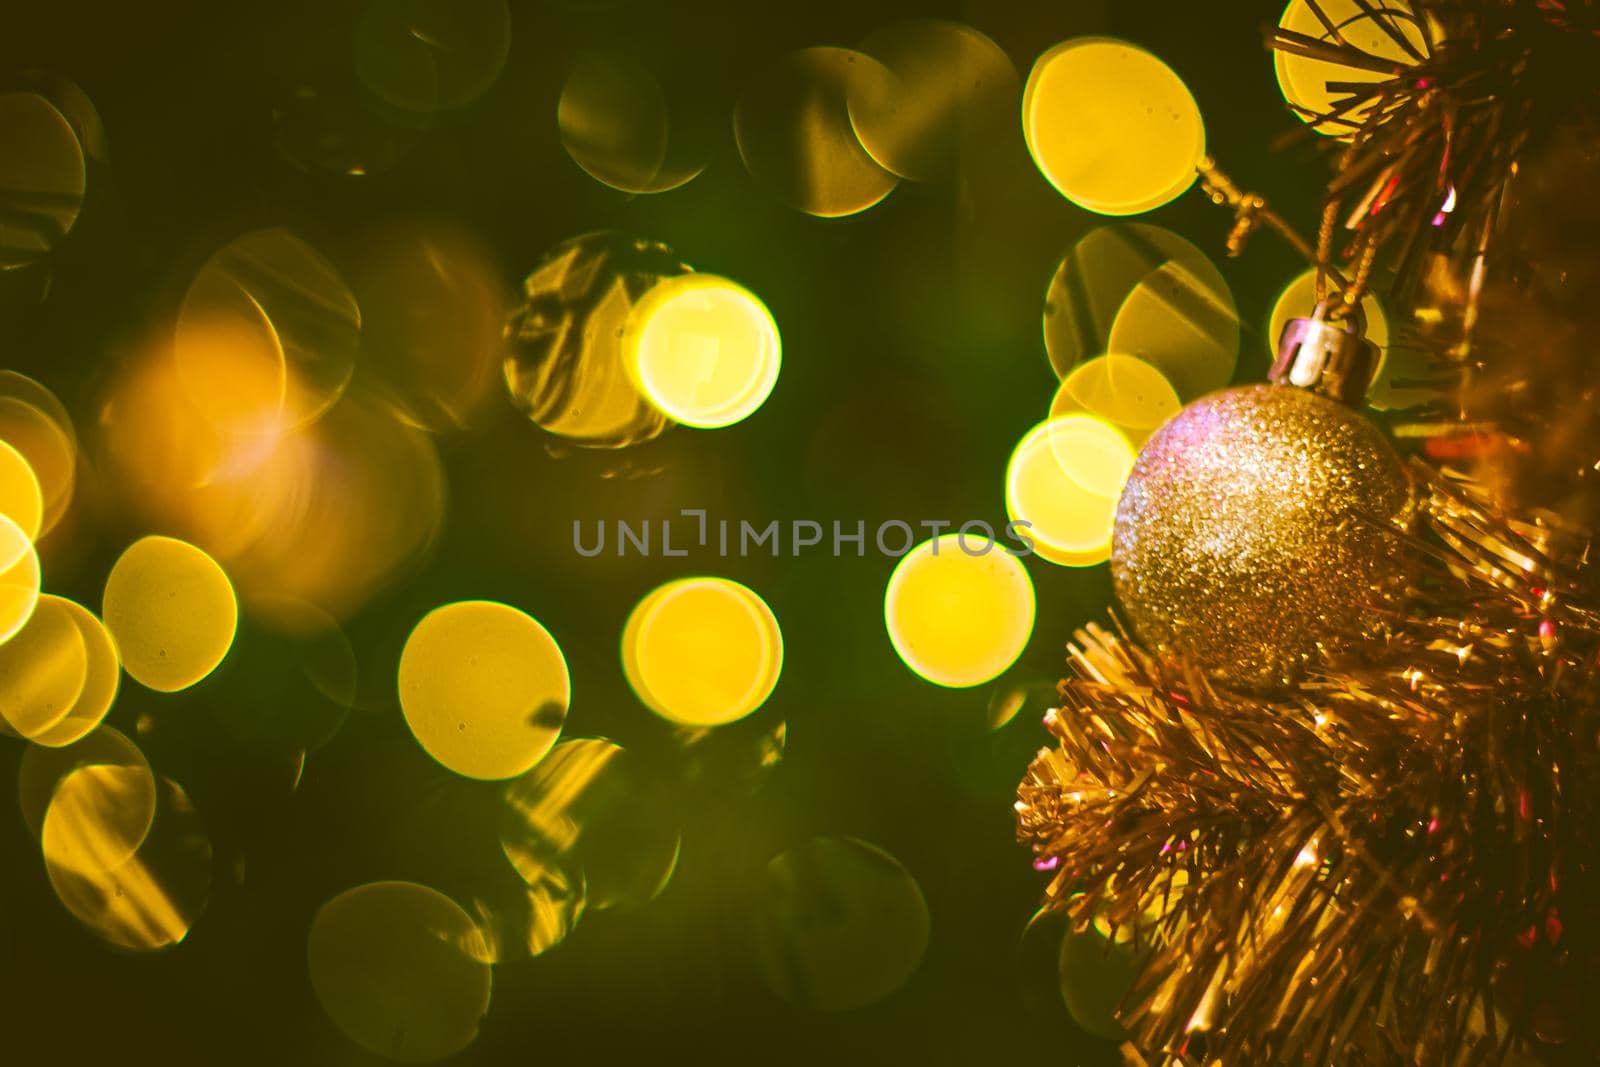 Christmas ball decoration on yellow background. Colorful blur bokeh background. christmas background